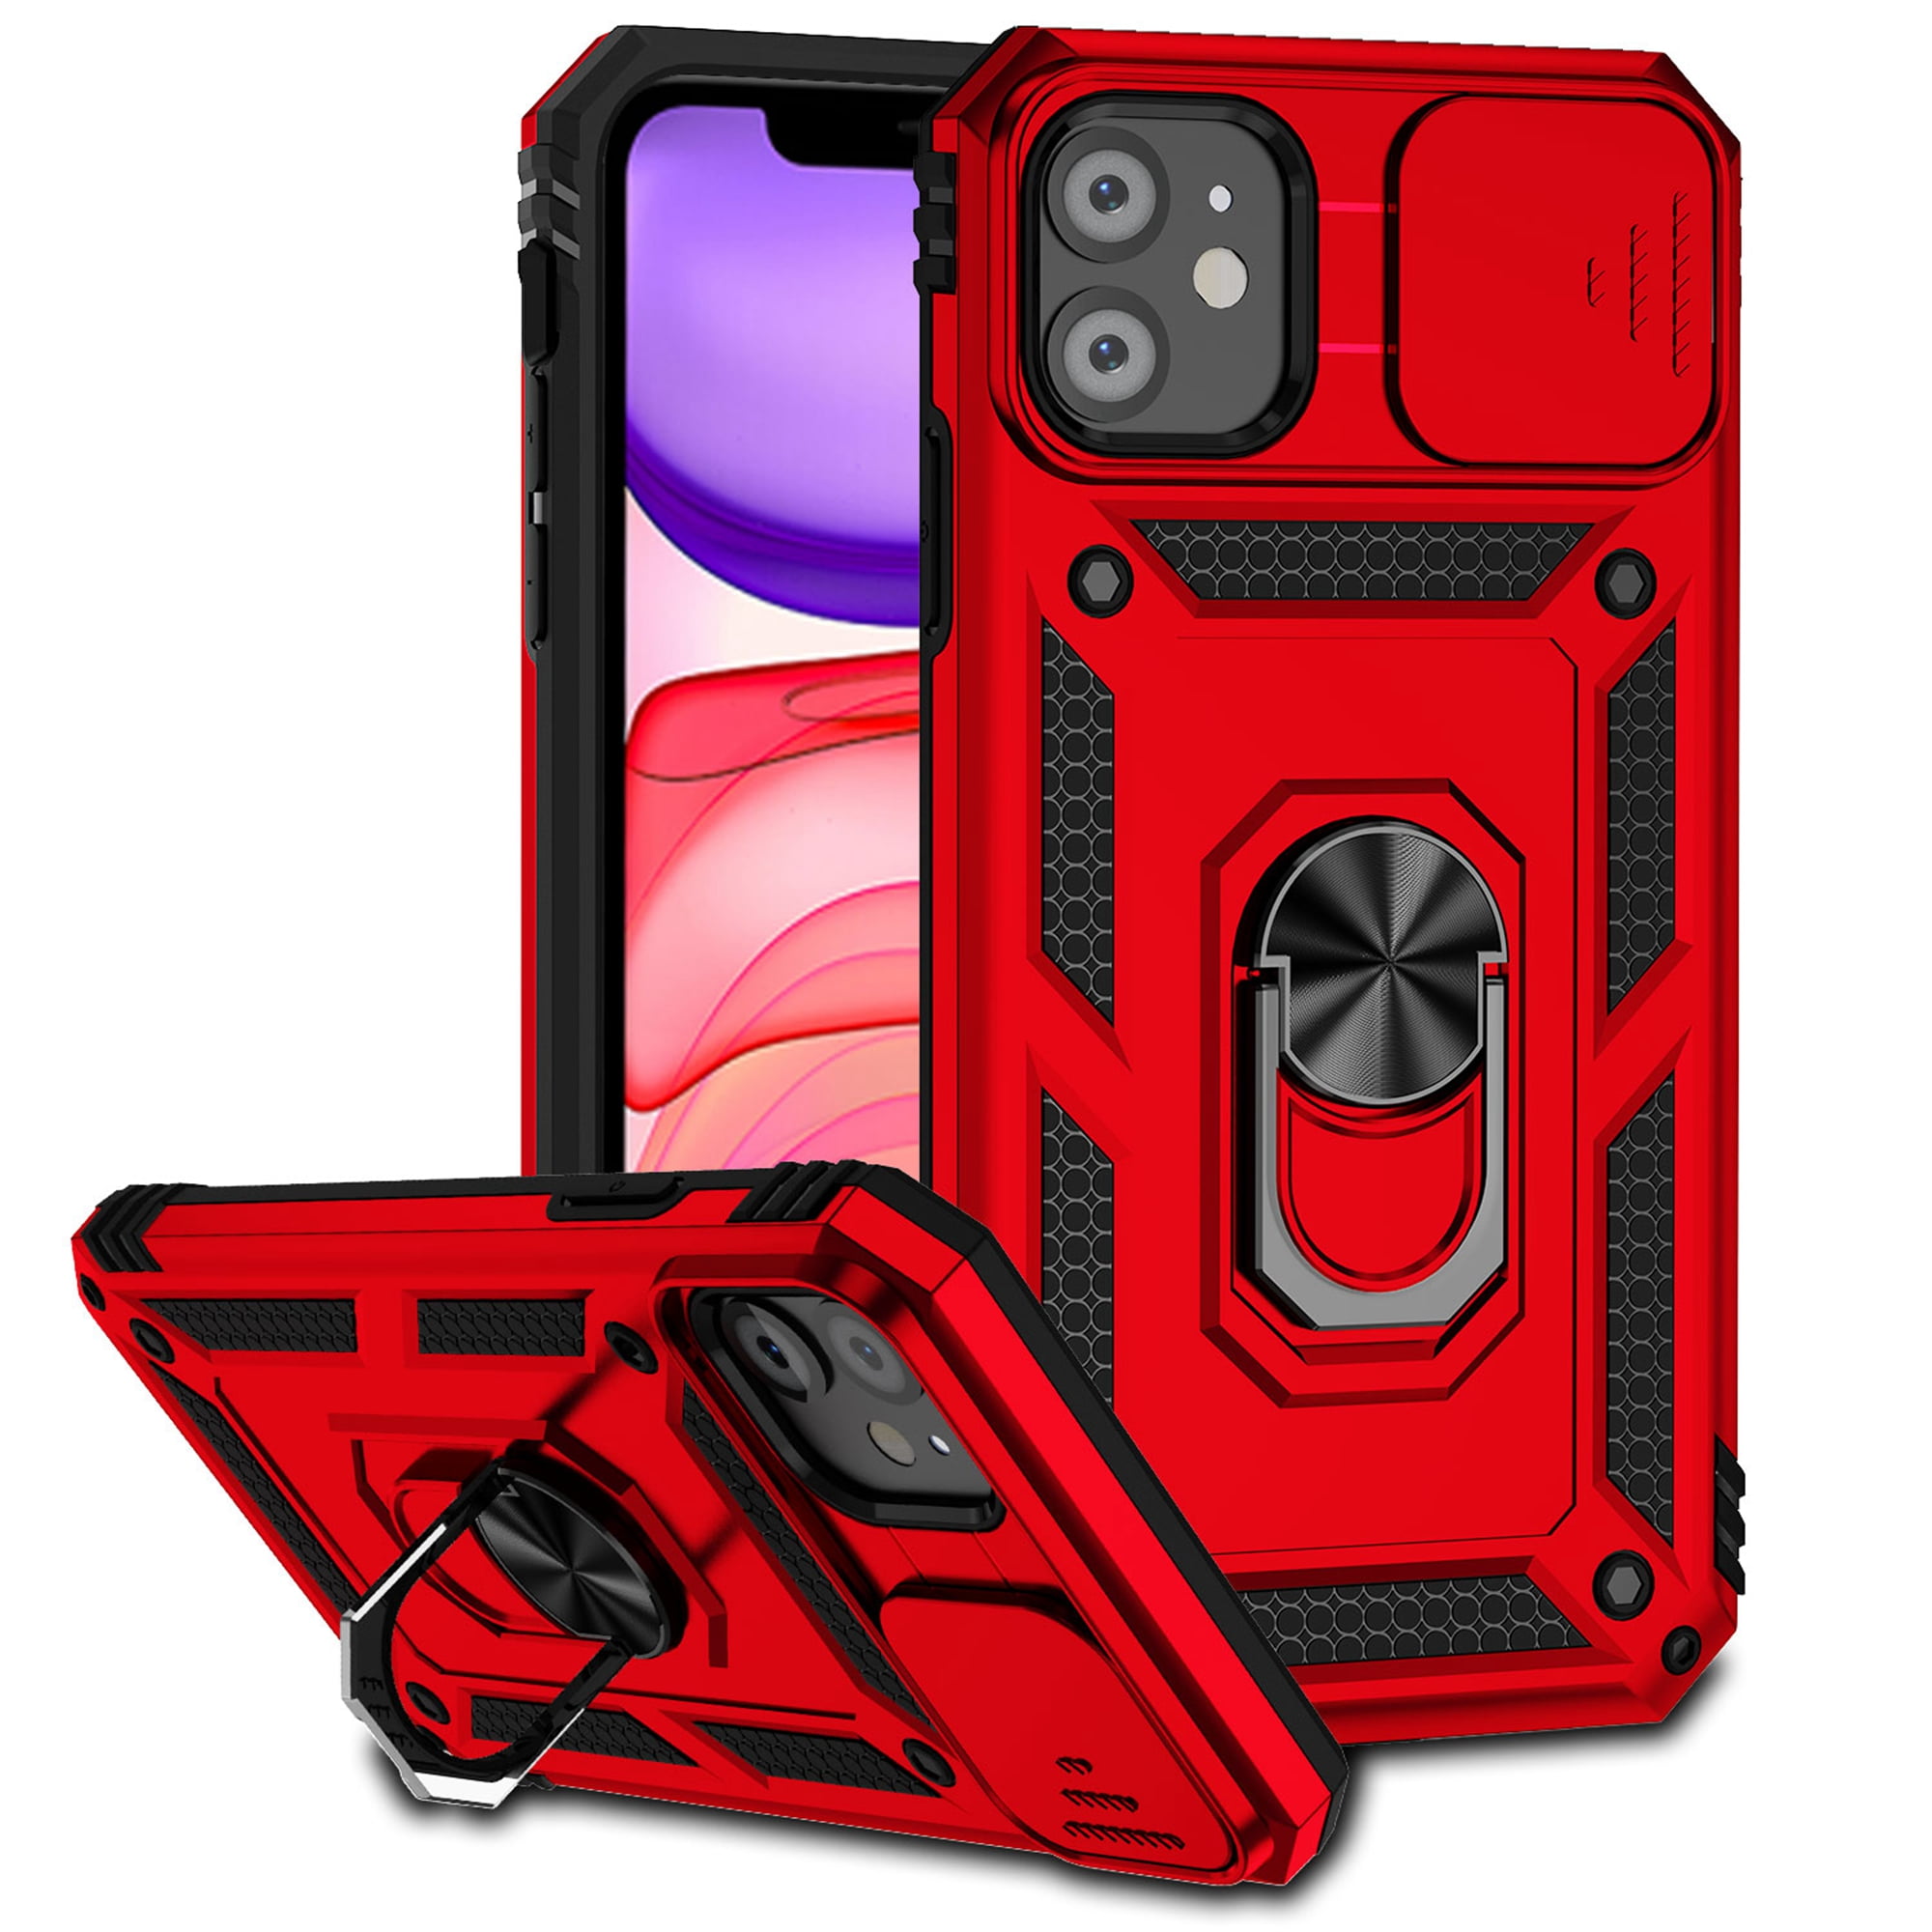 iPhone 11 Case with Built in Screen Protector,Dteck Full-Body Shockproof  Rubber Hybrid Protection Crystal Clear PC Back Protective Phone Case Cover  for Apple iPhone 11,Red 